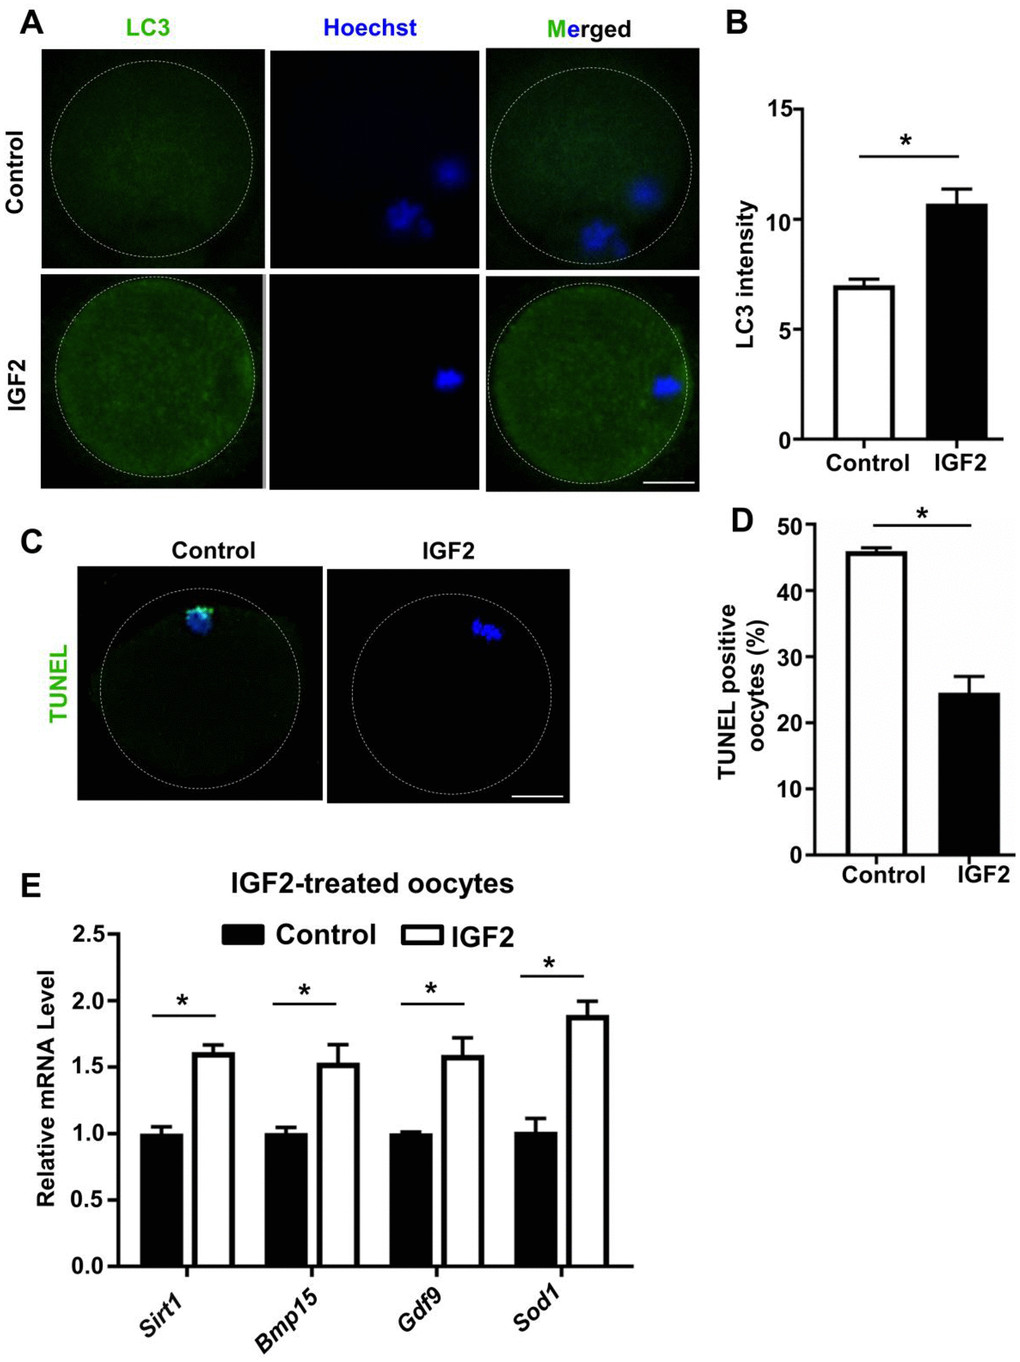 IGF2 reduces the apoptosis and promotes the level of autophagy in aged mouse oocytes. (A) LC3 staining showing the extent of autophagy occurring in control and IGF2-treated oocytes. (B) Quantification of LC3 intensity in control (n = 34) and IGF2-treated oocytes (n = 25). A Student’s t-test (two-tailed). *p C) TUNEL assay of control and IGF2-treated oocytes from aged mice. A green fluorescence signal indicates TUNEL-positive oocytes. Apoptotic signals were observed after 16 h of in vitro culture. DNA was counterstained with DAPI. Scale bar = 30 μm. (D) The percentage of apoptosis-positive oocytes in control (n = 61) and IGF2-treated oocytes group (n = 44). A Student’s t-test (two-tailed). *p E) qPCR results showing mRNA levels of Sirt1, Bmp15, Gdf9, and Sod1 in MII-stage oocytes after in vitro maturation with or without IGF2-treatment. *p t-test (two-tailed). Error bars indicate the SEM.